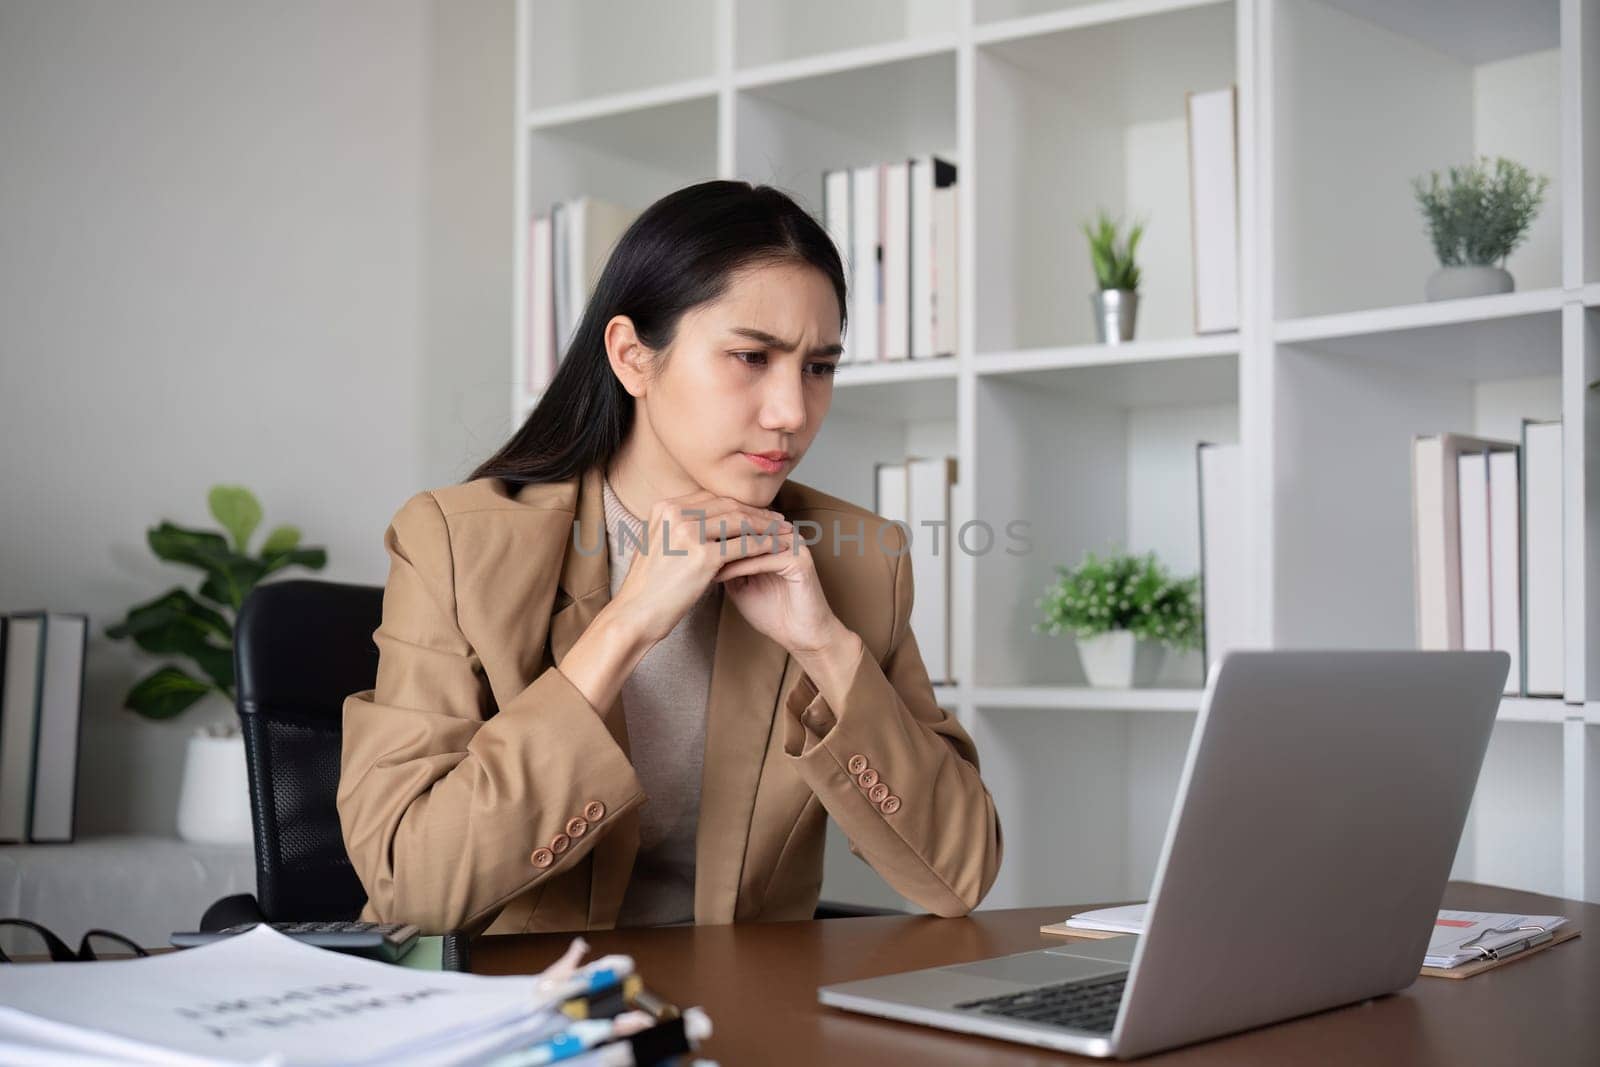 Unhappy Asian business woman shows stress over unsuccessful business while working in home office decorated with soothing green plants. by wichayada